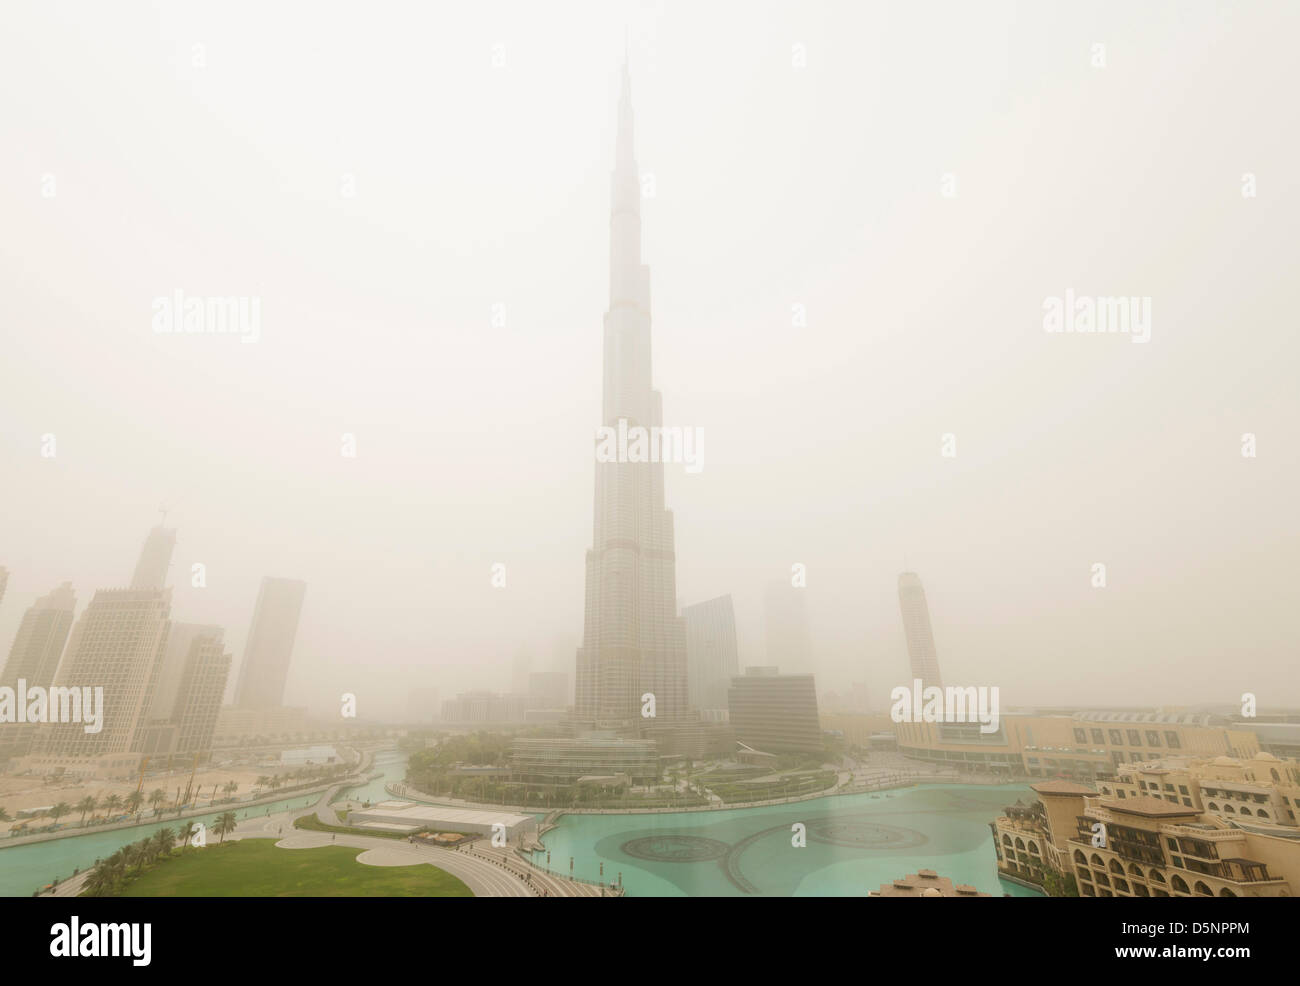 Dubai, UAE. 6th April 2013. A large sandstorm affecting Dubai with the Burj Khalifa tower, the world's tallest building almost hidden in very poor visibility. Credit: Iain Masterton / Alamy Live News Stock Photo